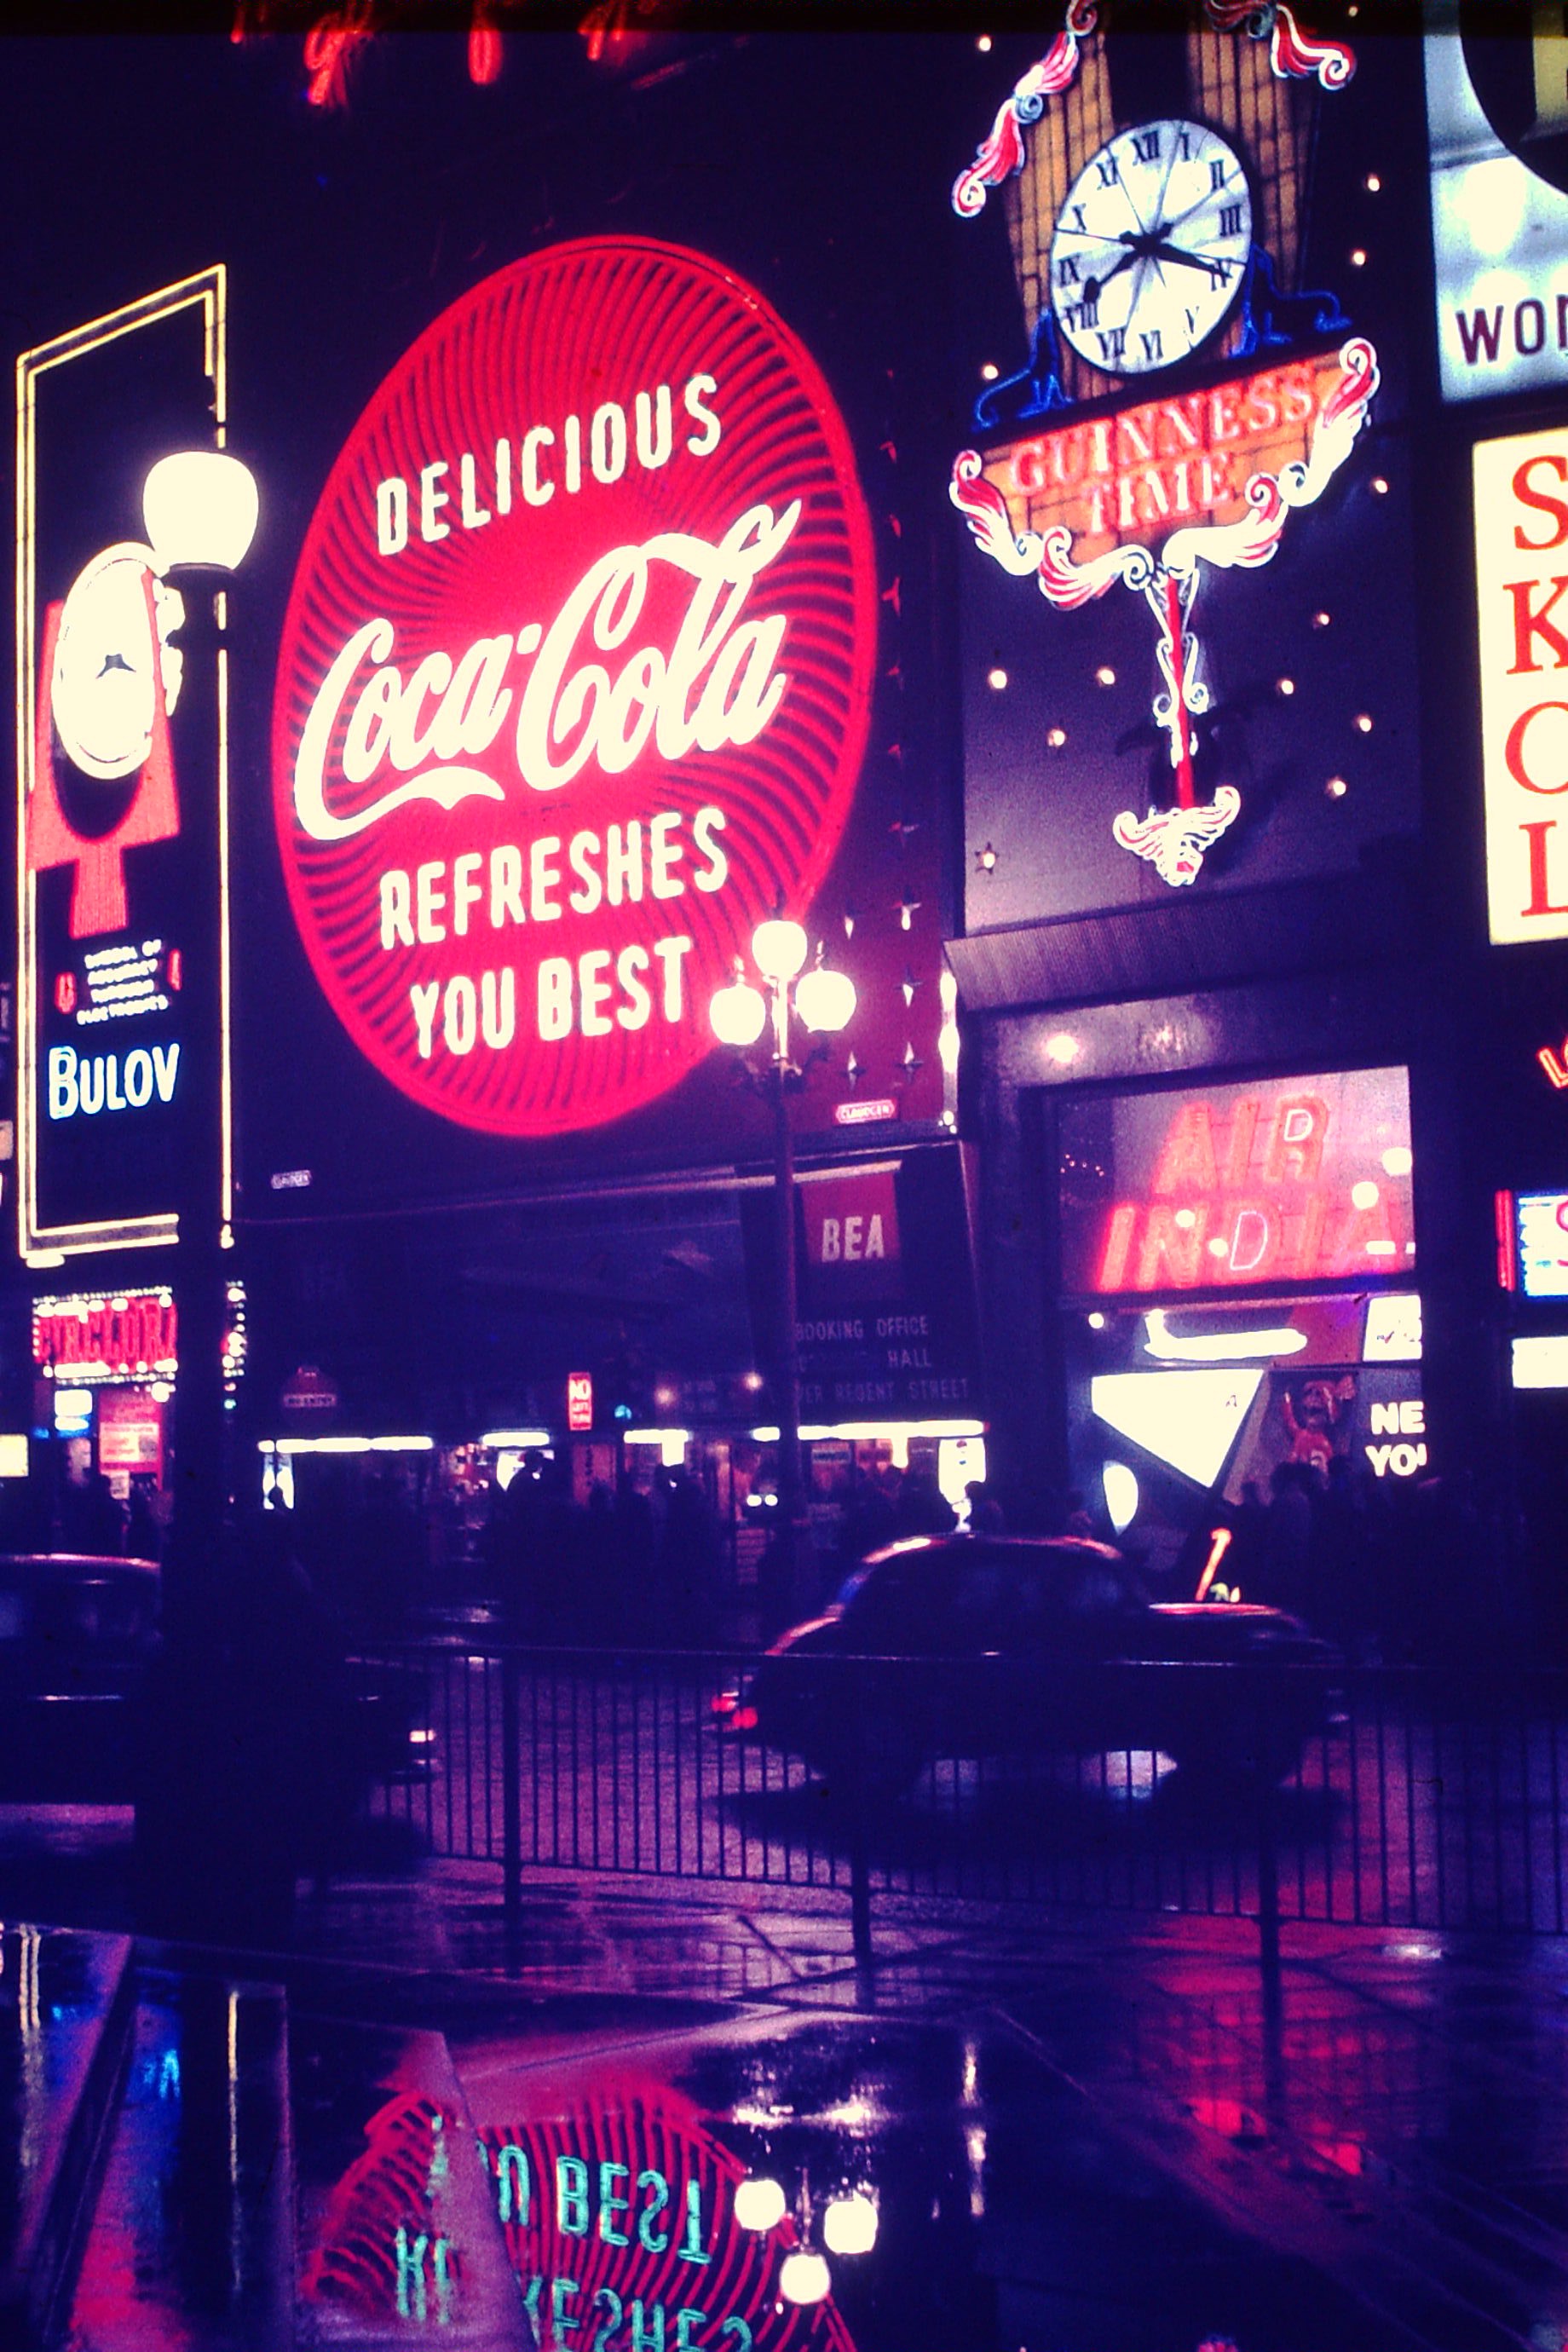 Piccadilly Circus: The Coca Cola Advert.